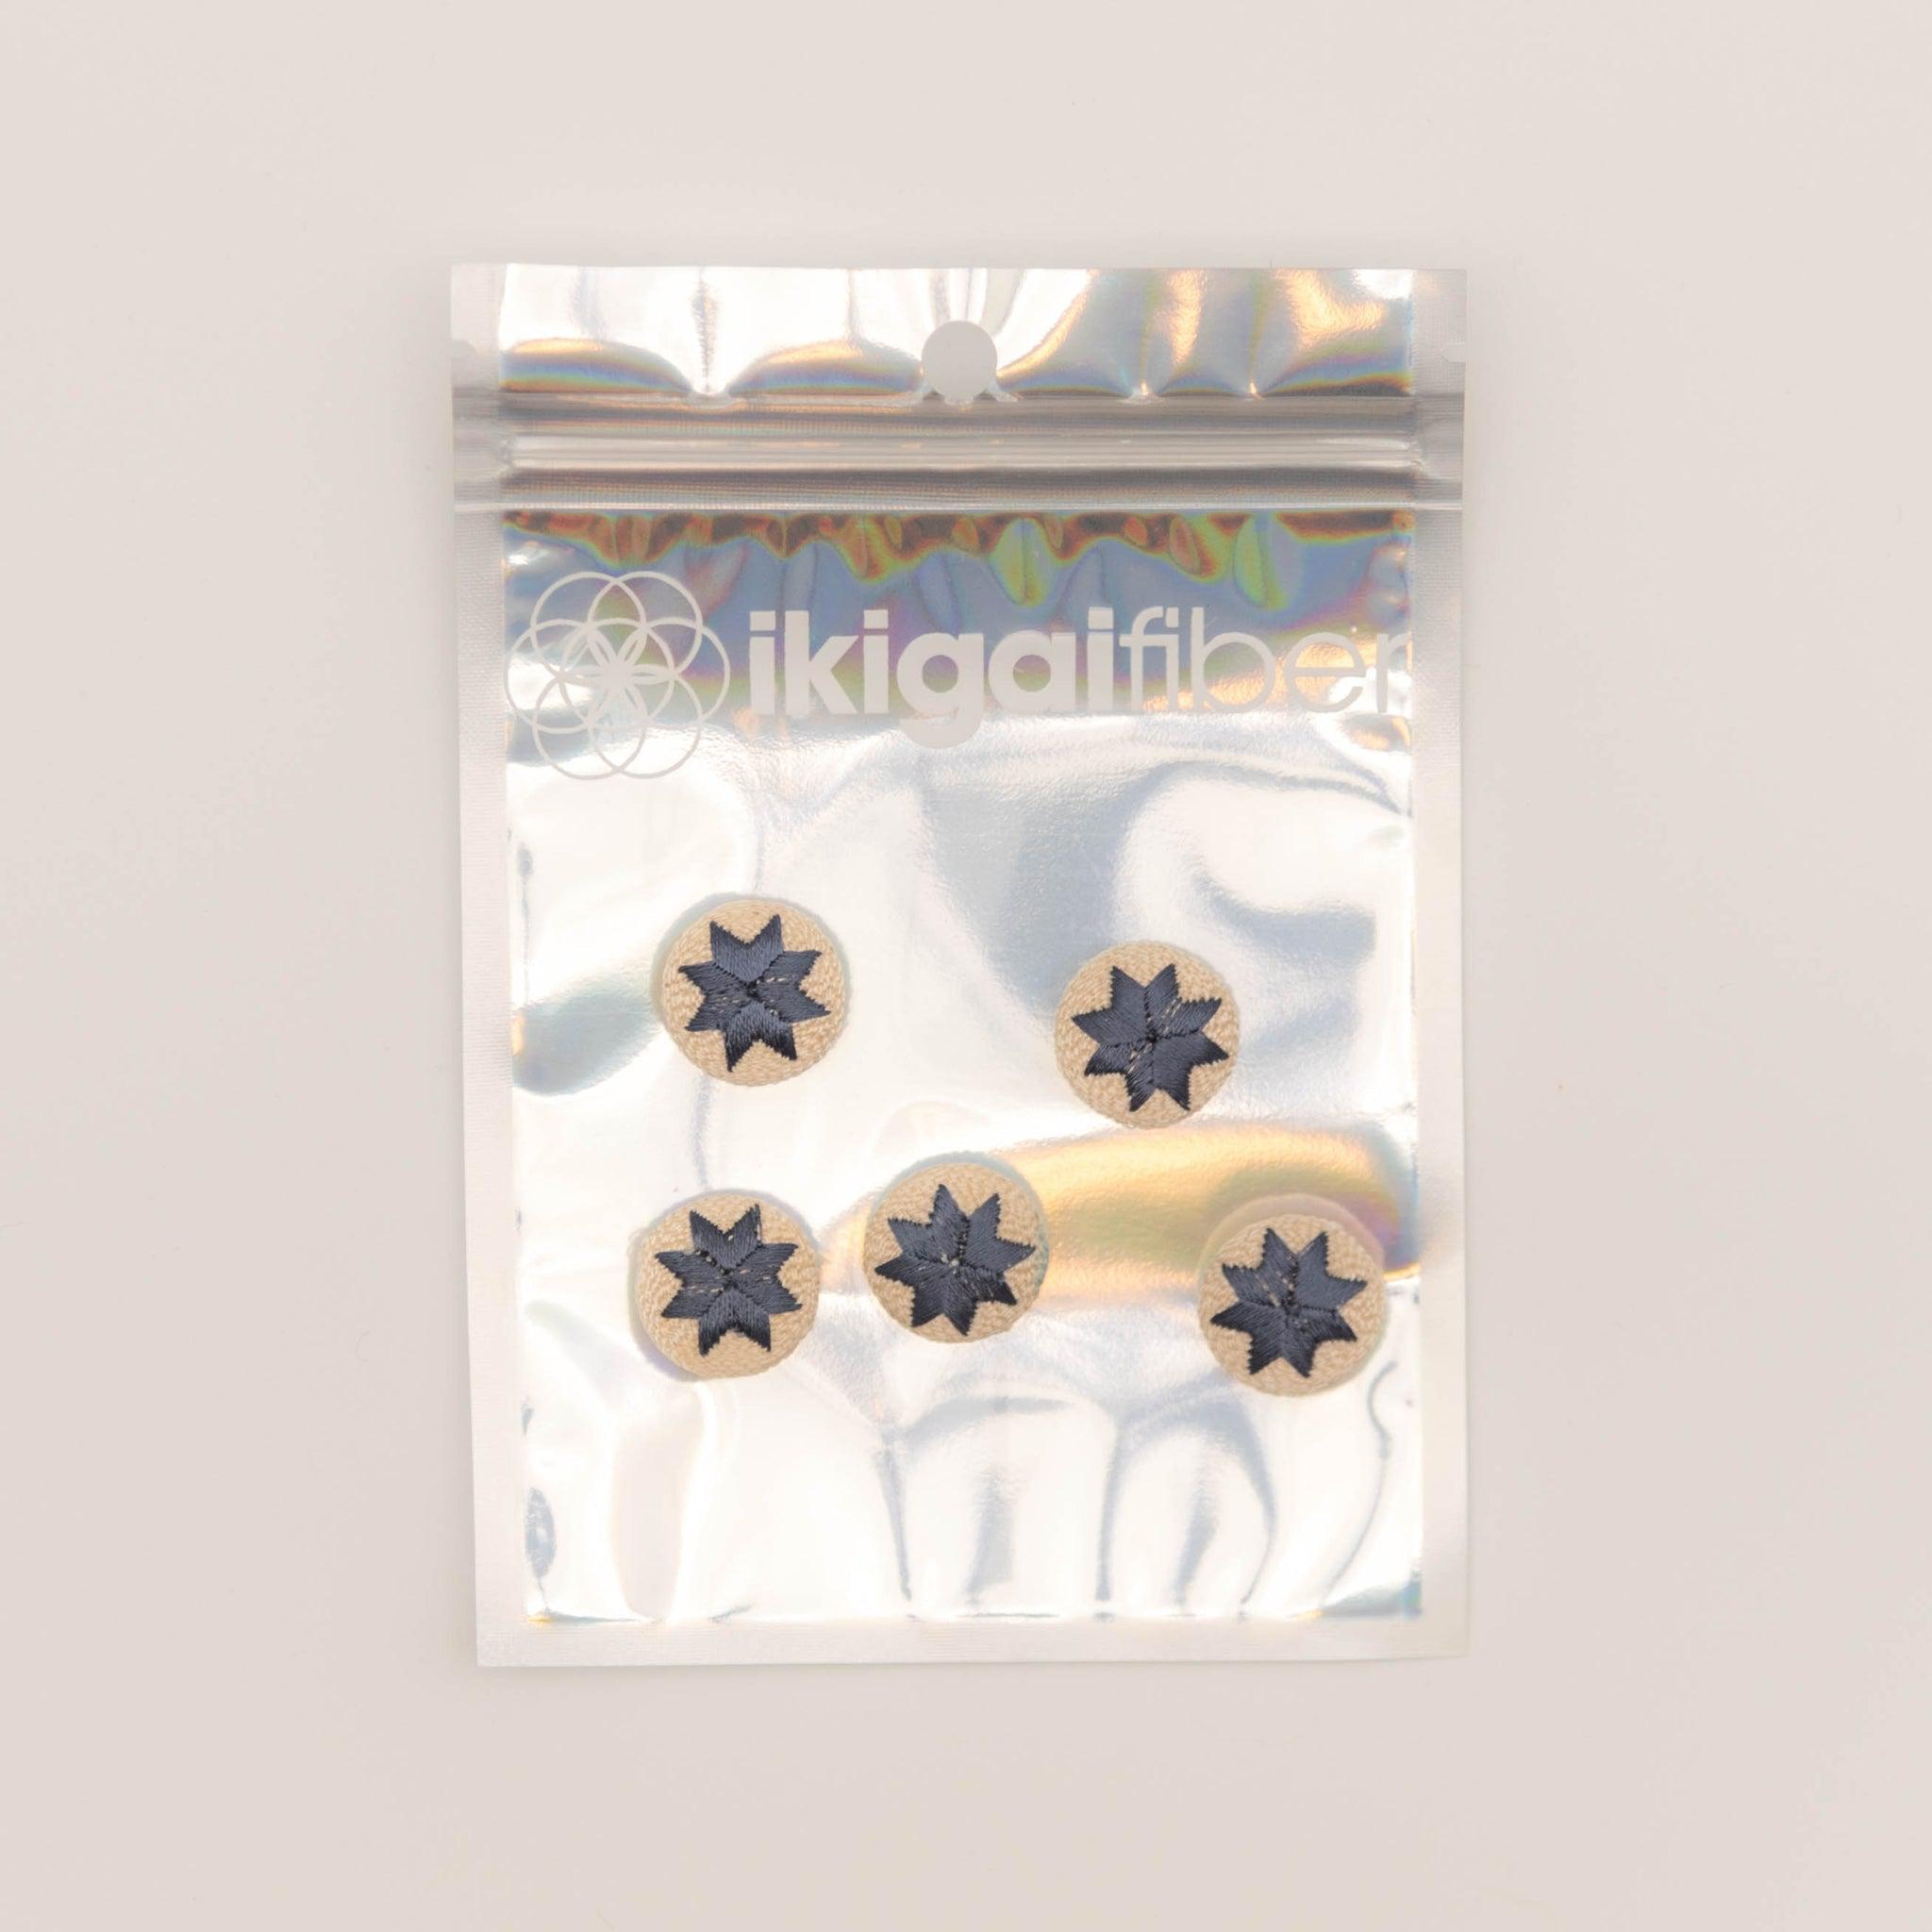 Ikigai Fiber-Embroidered Buttons Steel-button-gather here online